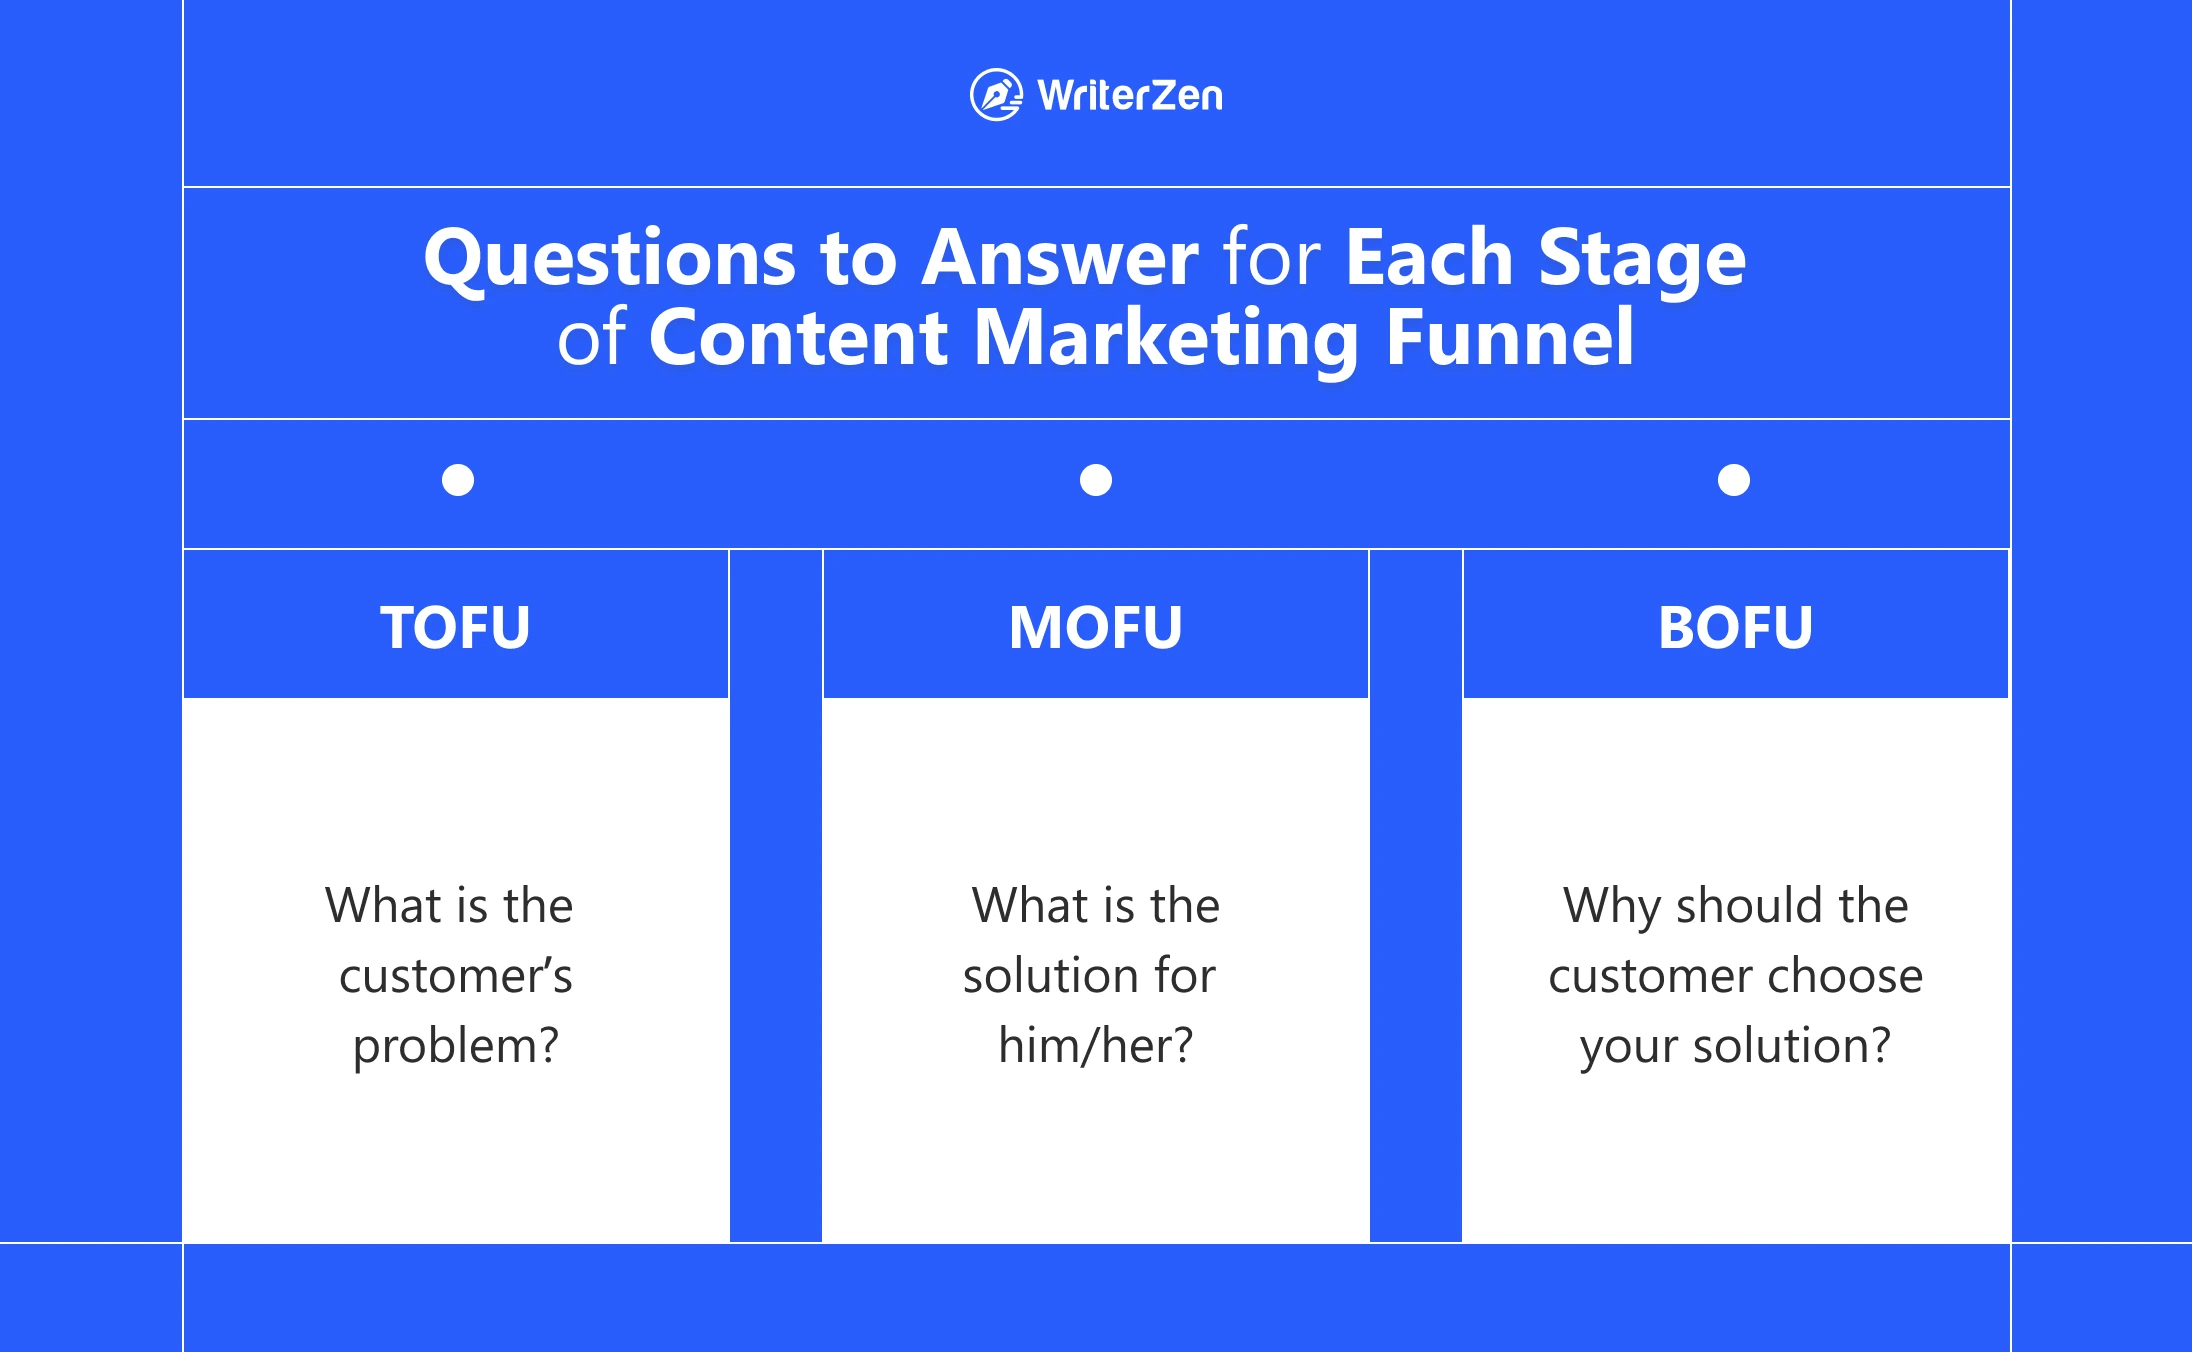 Questions to Answer for Each Stage of Content Marketing Funnel